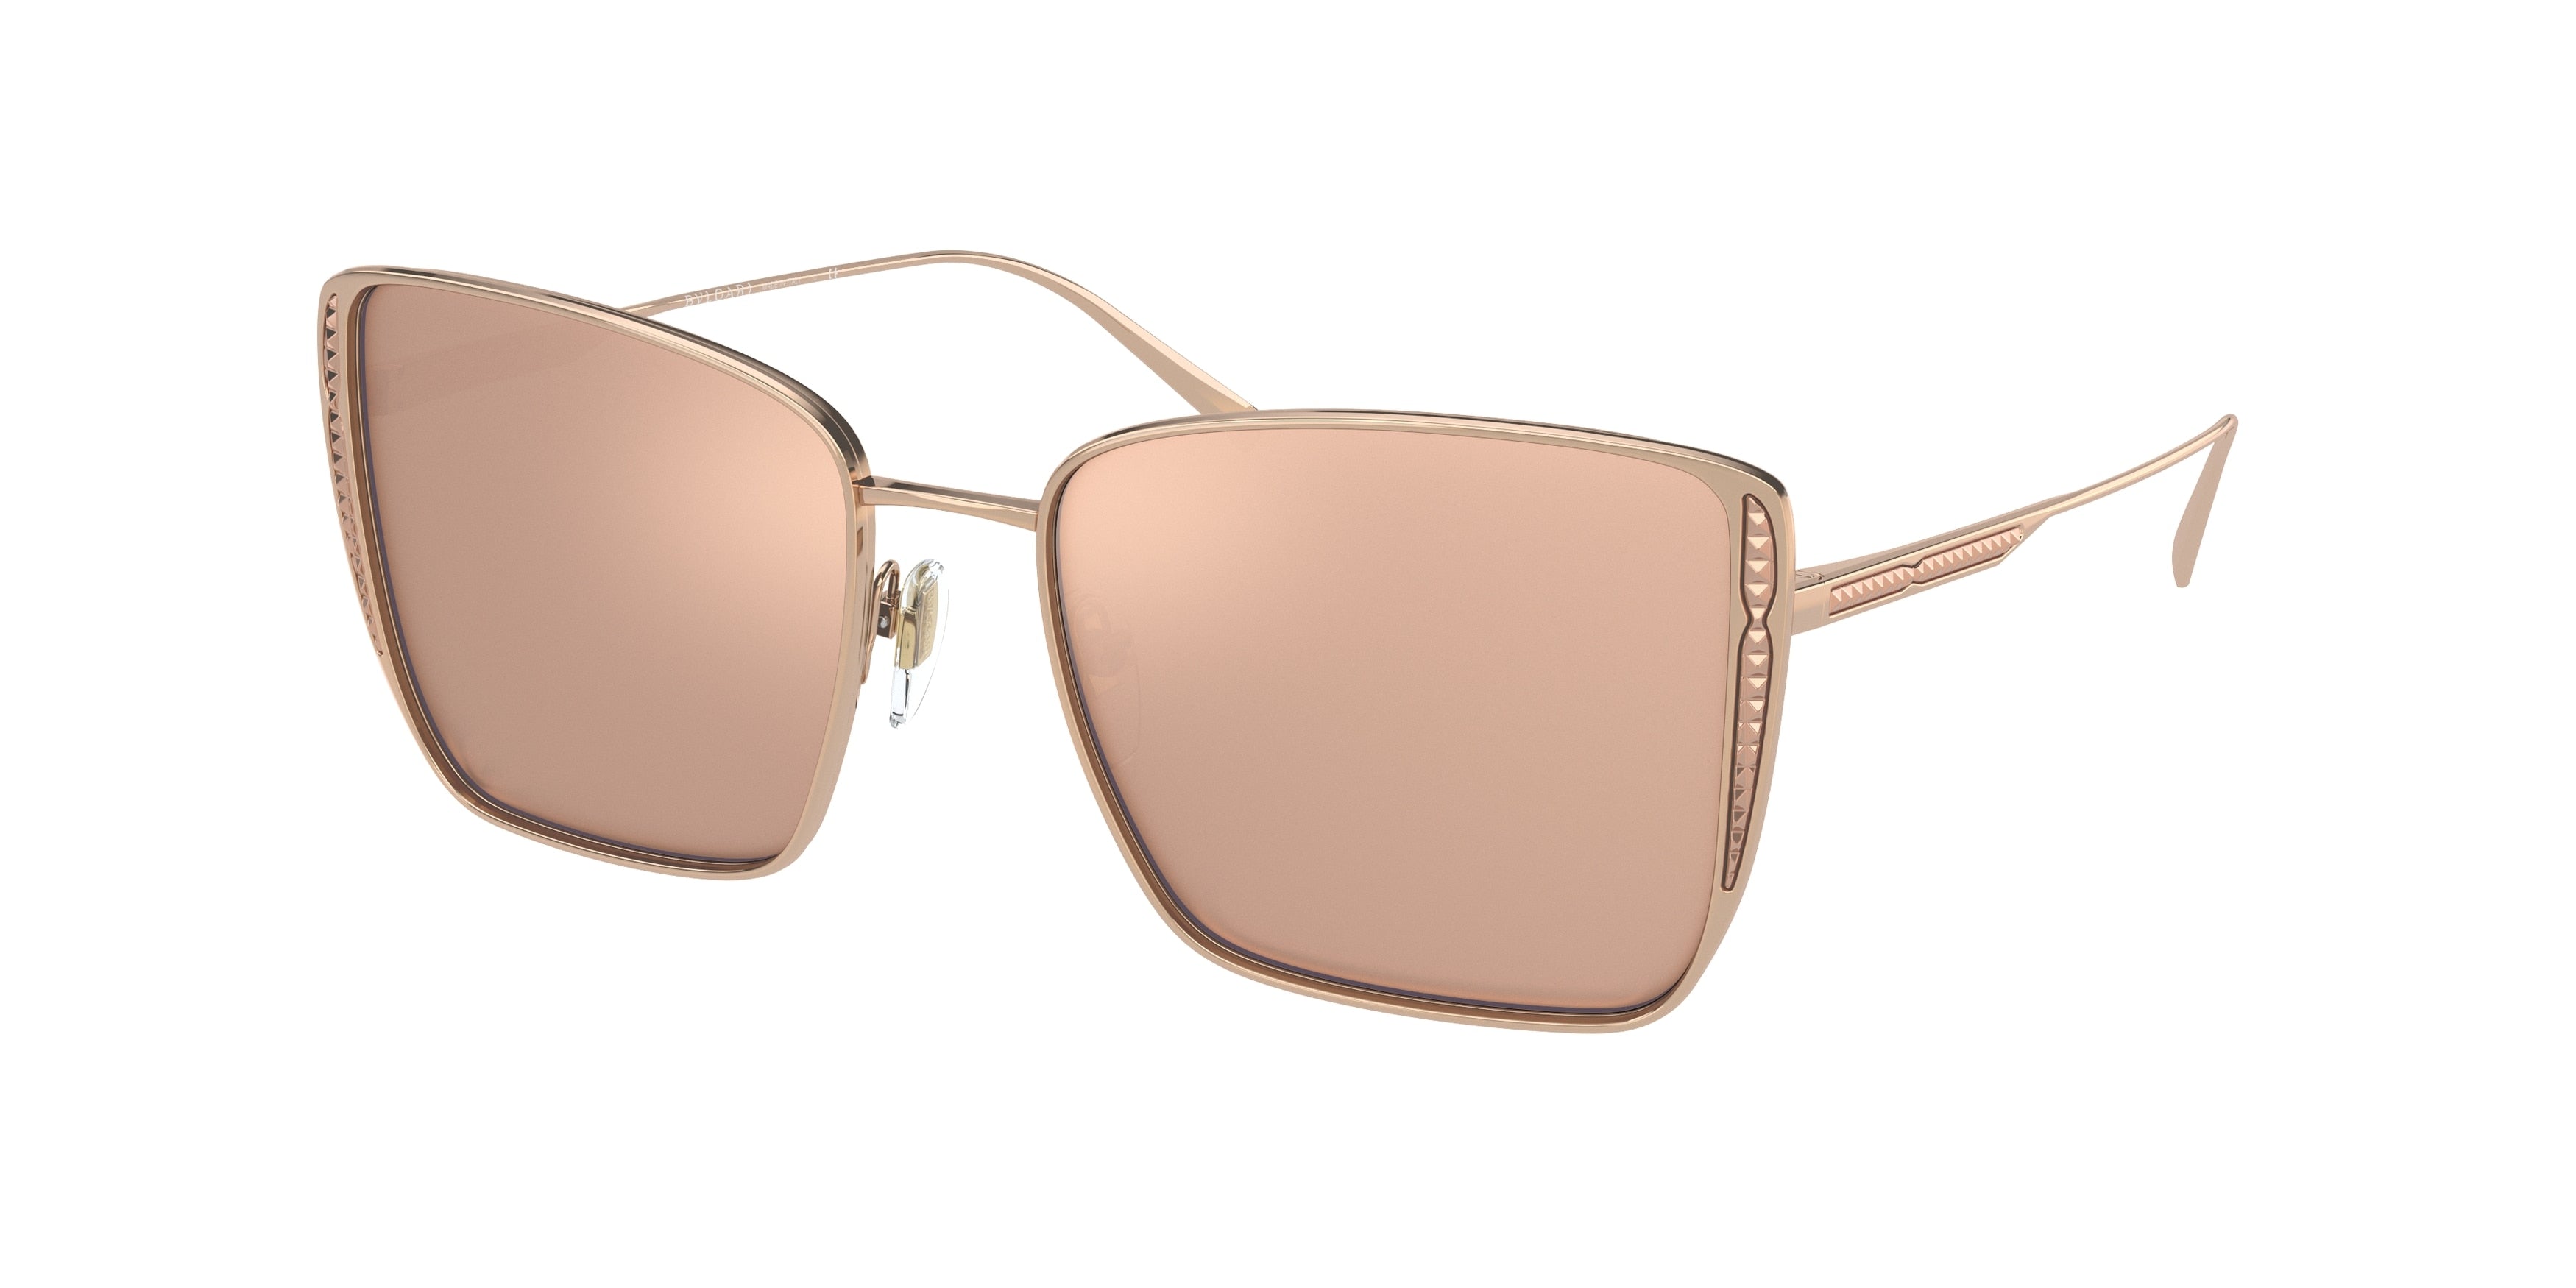 Bvlgari BV6176 Square Sunglasses  20140W-Pink Gold 55-140-17 - Color Map Pink